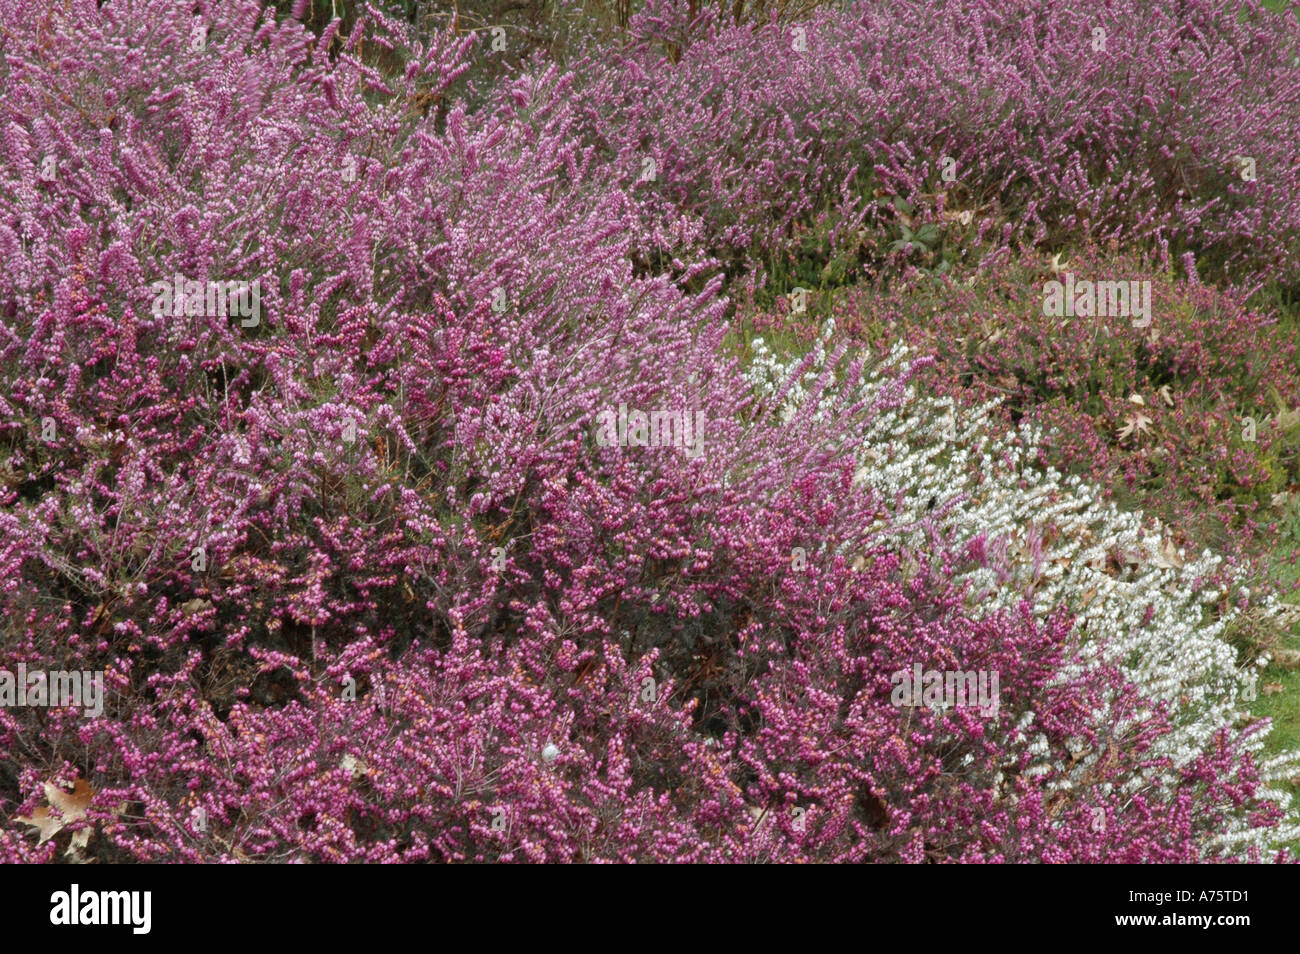 9cm Pot Heather Erica Carnea Lohses Ruby Winter Flowering Low Growing Ground Cover Ruby Red Flowers